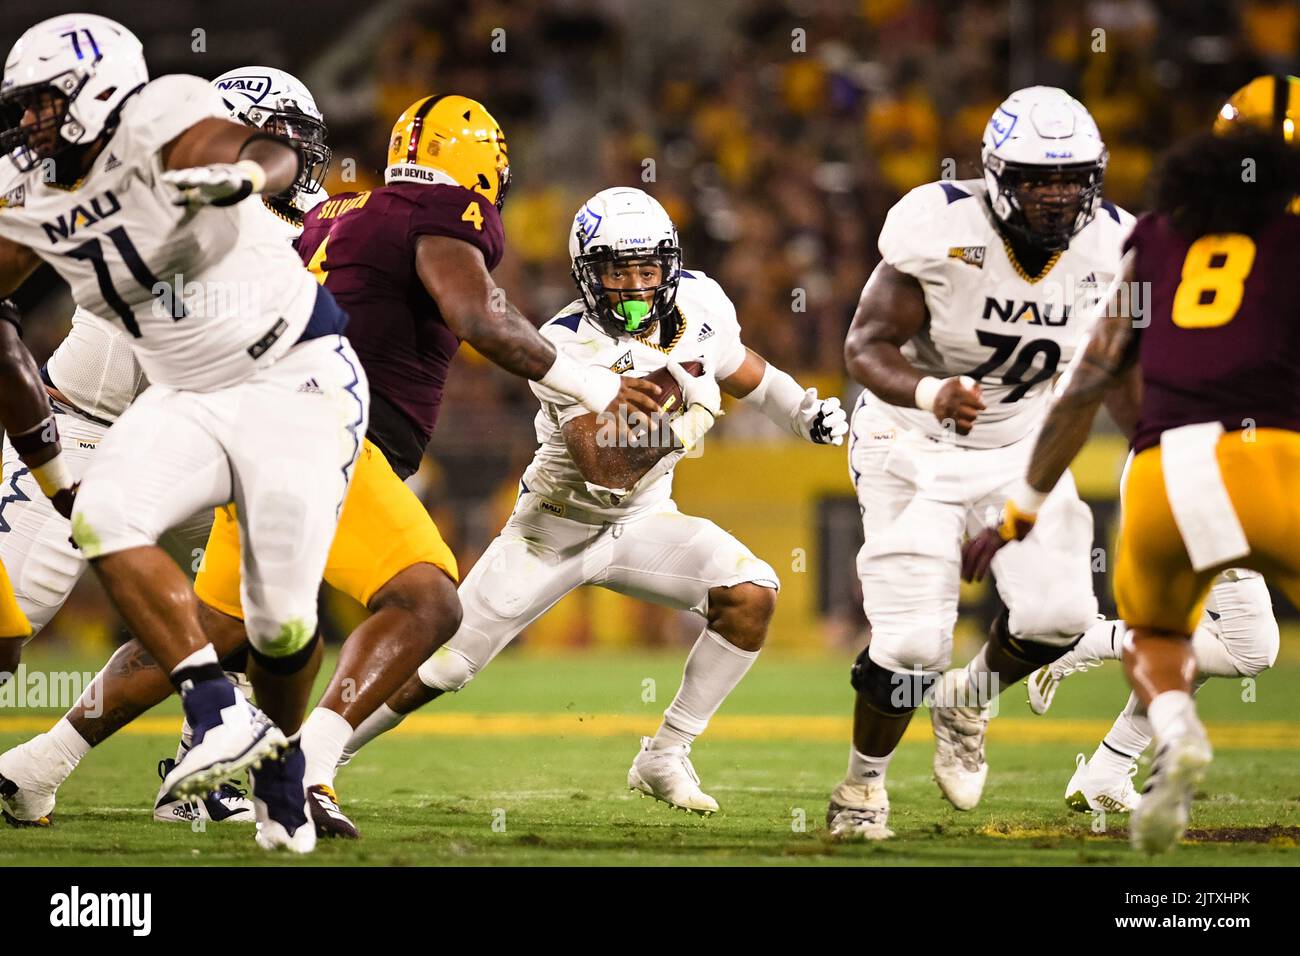 Northern Arizona running back Kevin Daniels (22) runs for a first down in the first quarter of an NCAA college football game against Arizona State in Stock Photo